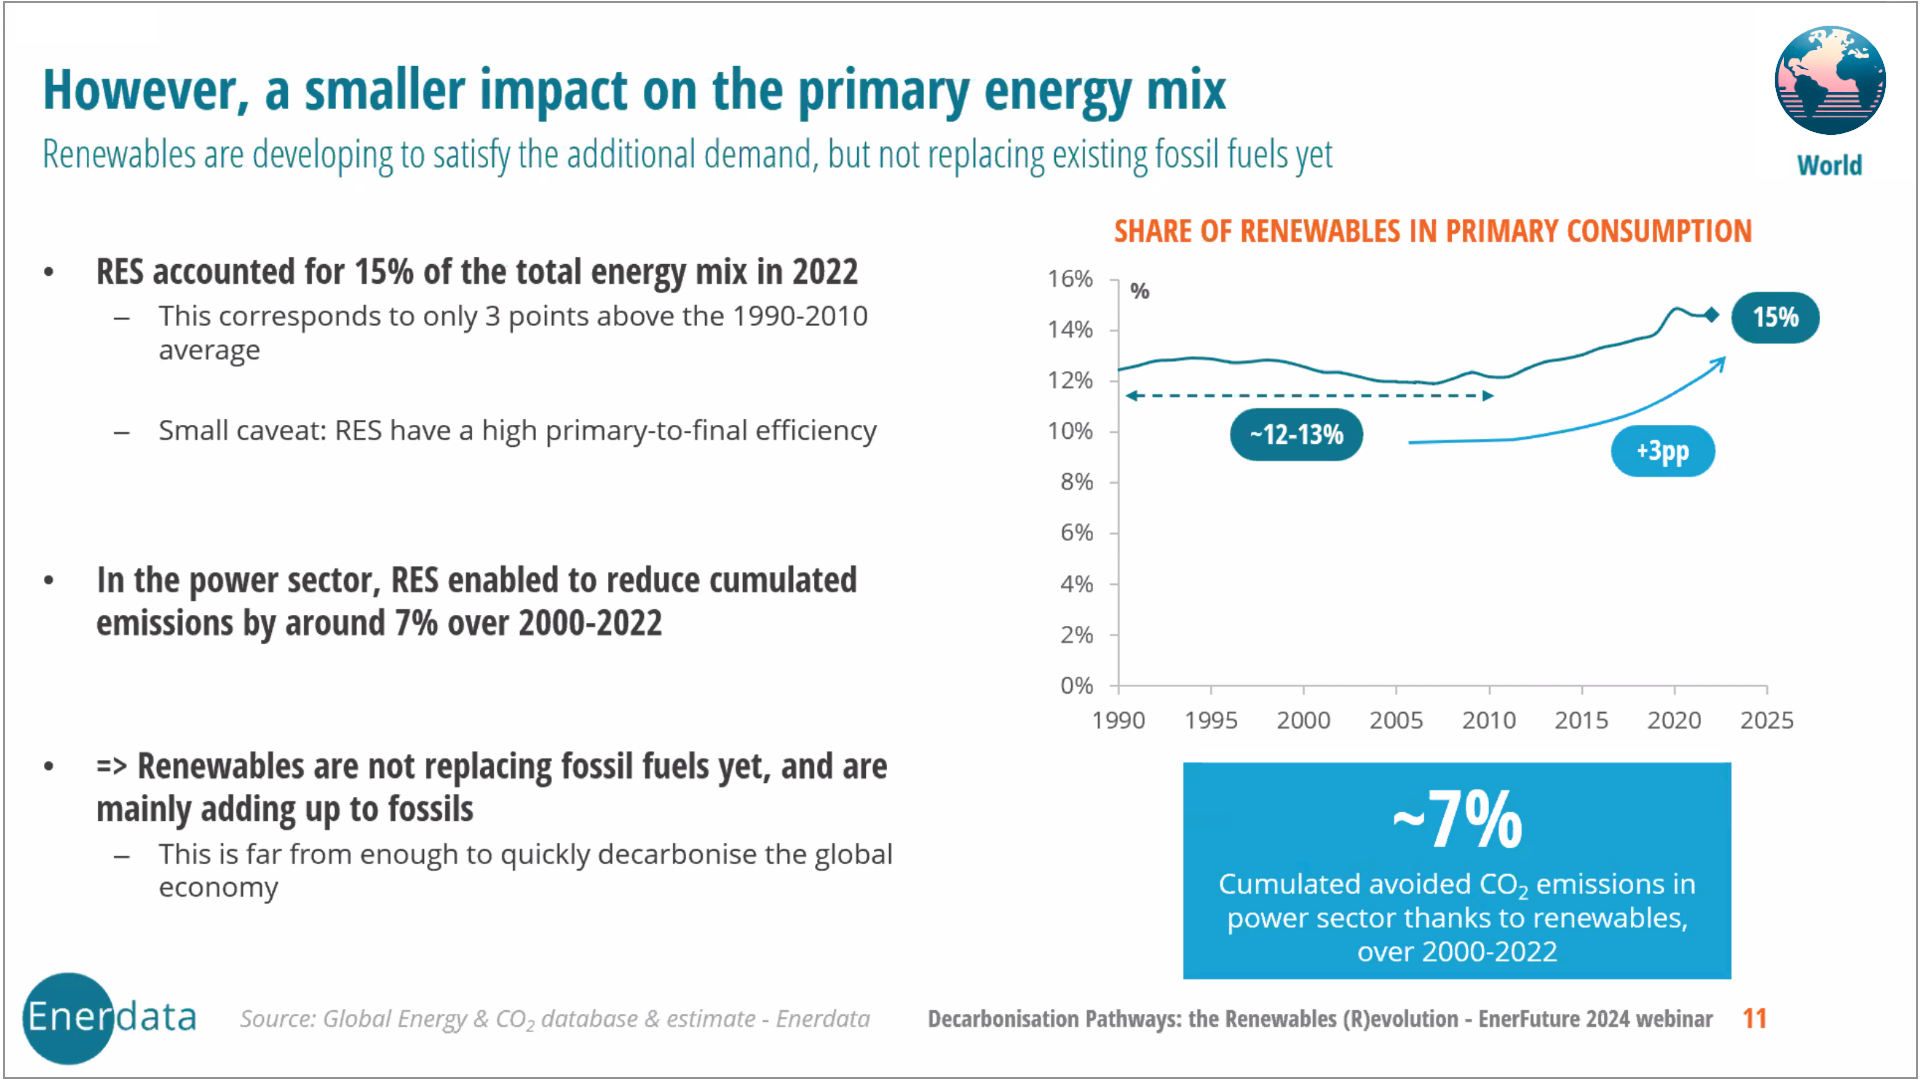 However, a smaller impact on the primary energy mix